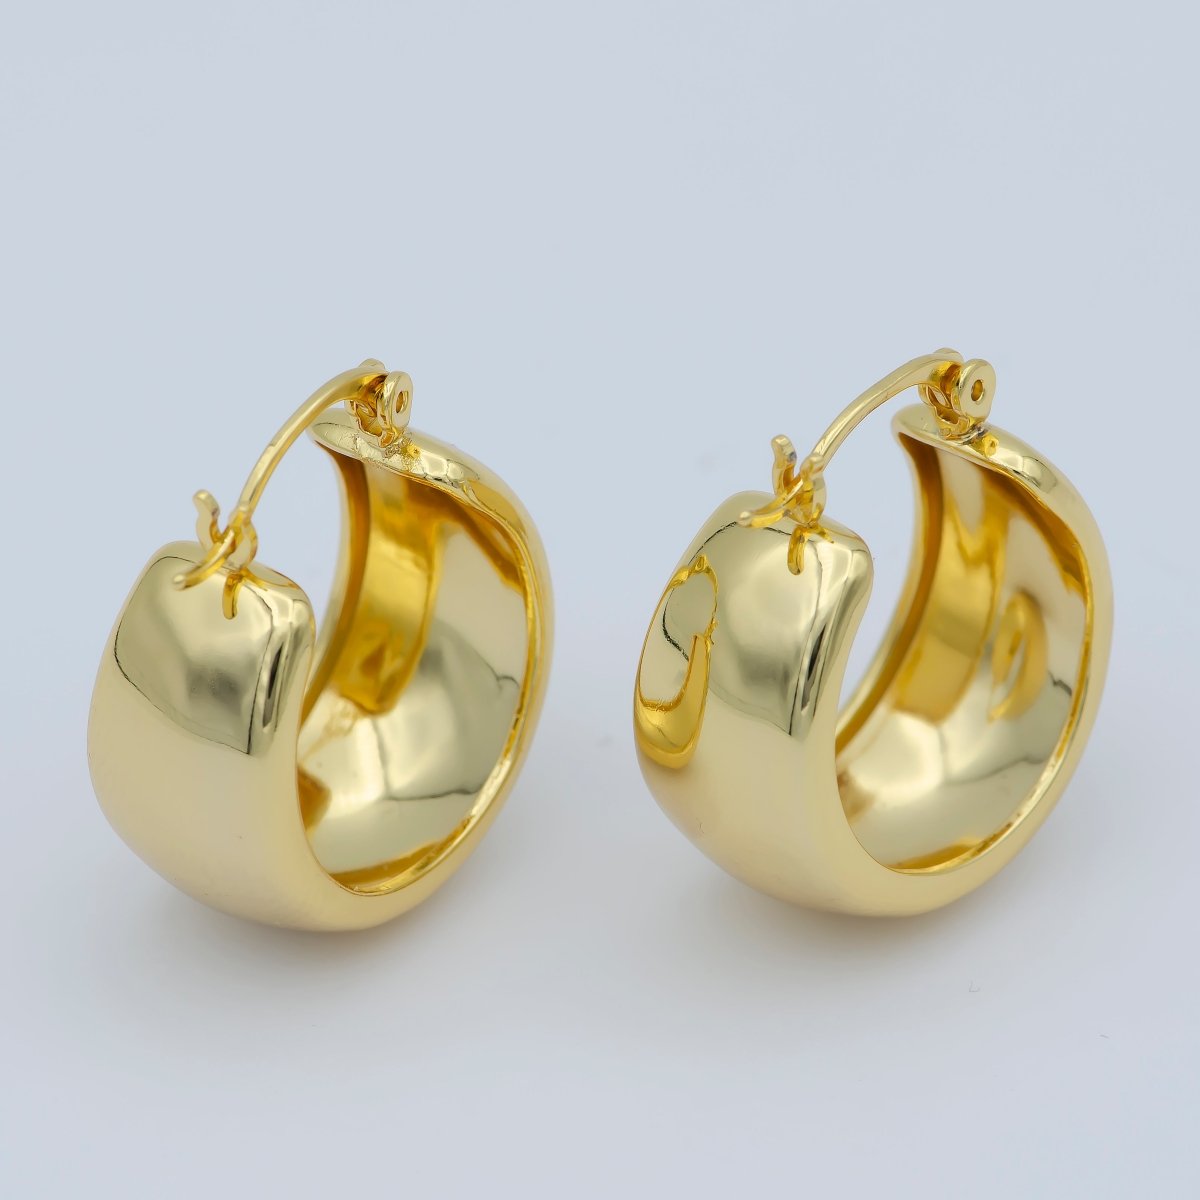 Chunky Gold Earrings, Minimalist Wide Dome Hoop Earrings in 24k Gold Filled Available in Thick Gold Chunky Hoops P-265 - DLUXCA